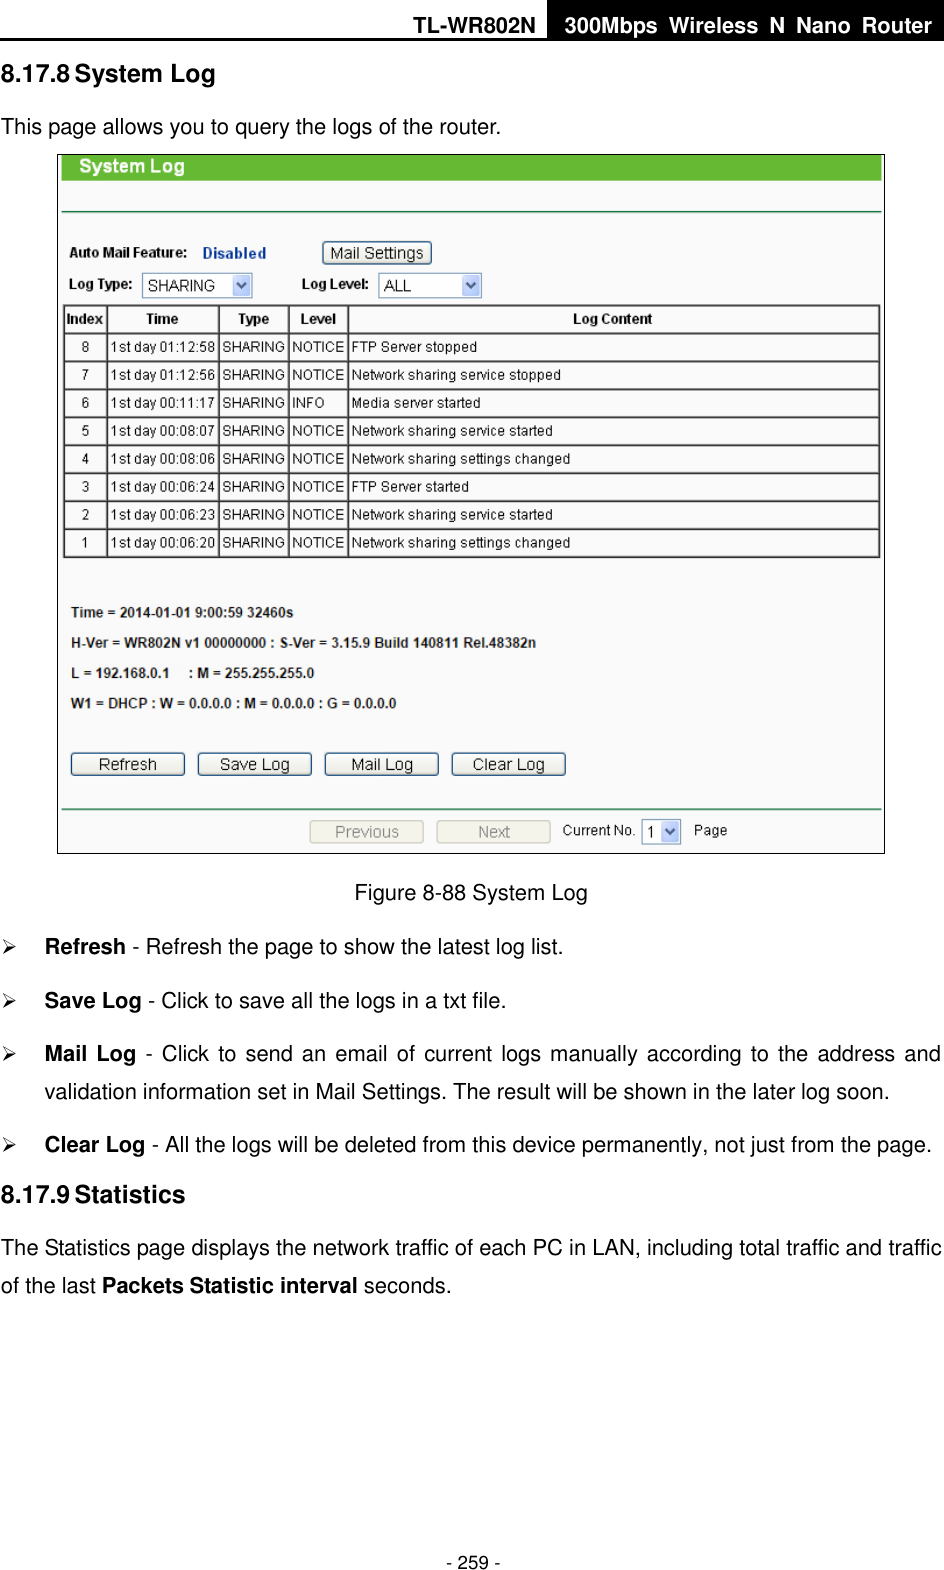 TL-WR802N 300Mbps  Wireless  N  Nano  Router  - 259 - 8.17.8 System Log This page allows you to query the logs of the router.  Figure 8-88 System Log  Refresh - Refresh the page to show the latest log list.  Save Log - Click to save all the logs in a txt file.  Mail Log - Click to send an email of current logs manually according to the address and validation information set in Mail Settings. The result will be shown in the later log soon.  Clear Log - All the logs will be deleted from this device permanently, not just from the page. 8.17.9 Statistics The Statistics page displays the network traffic of each PC in LAN, including total traffic and traffic of the last Packets Statistic interval seconds. 